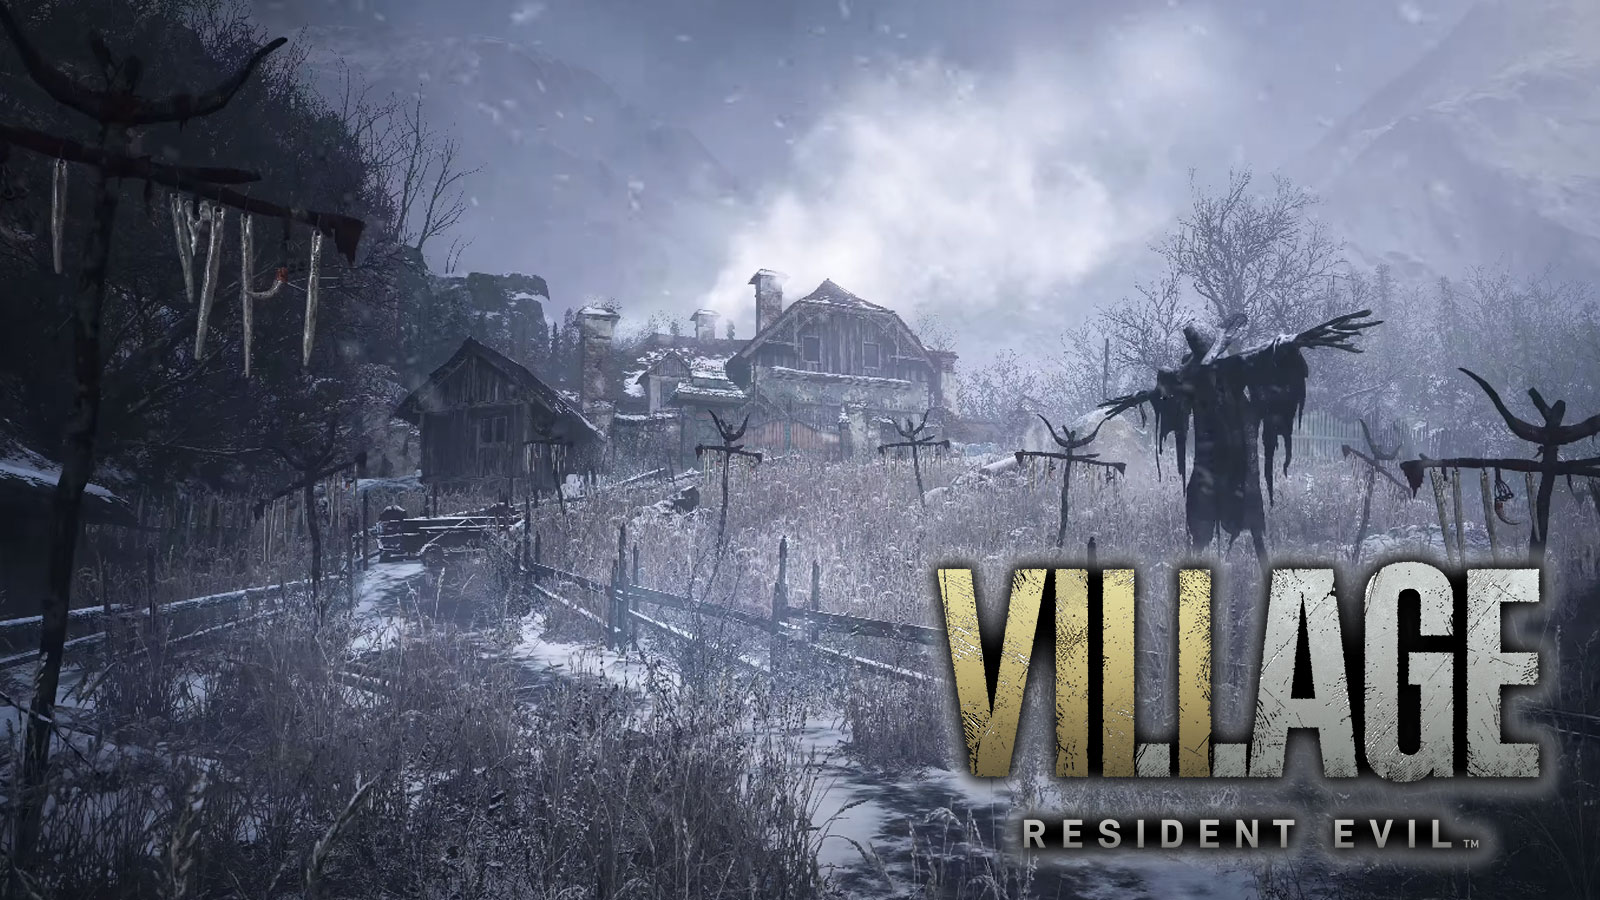 Resident evil village steam is currently in фото 70